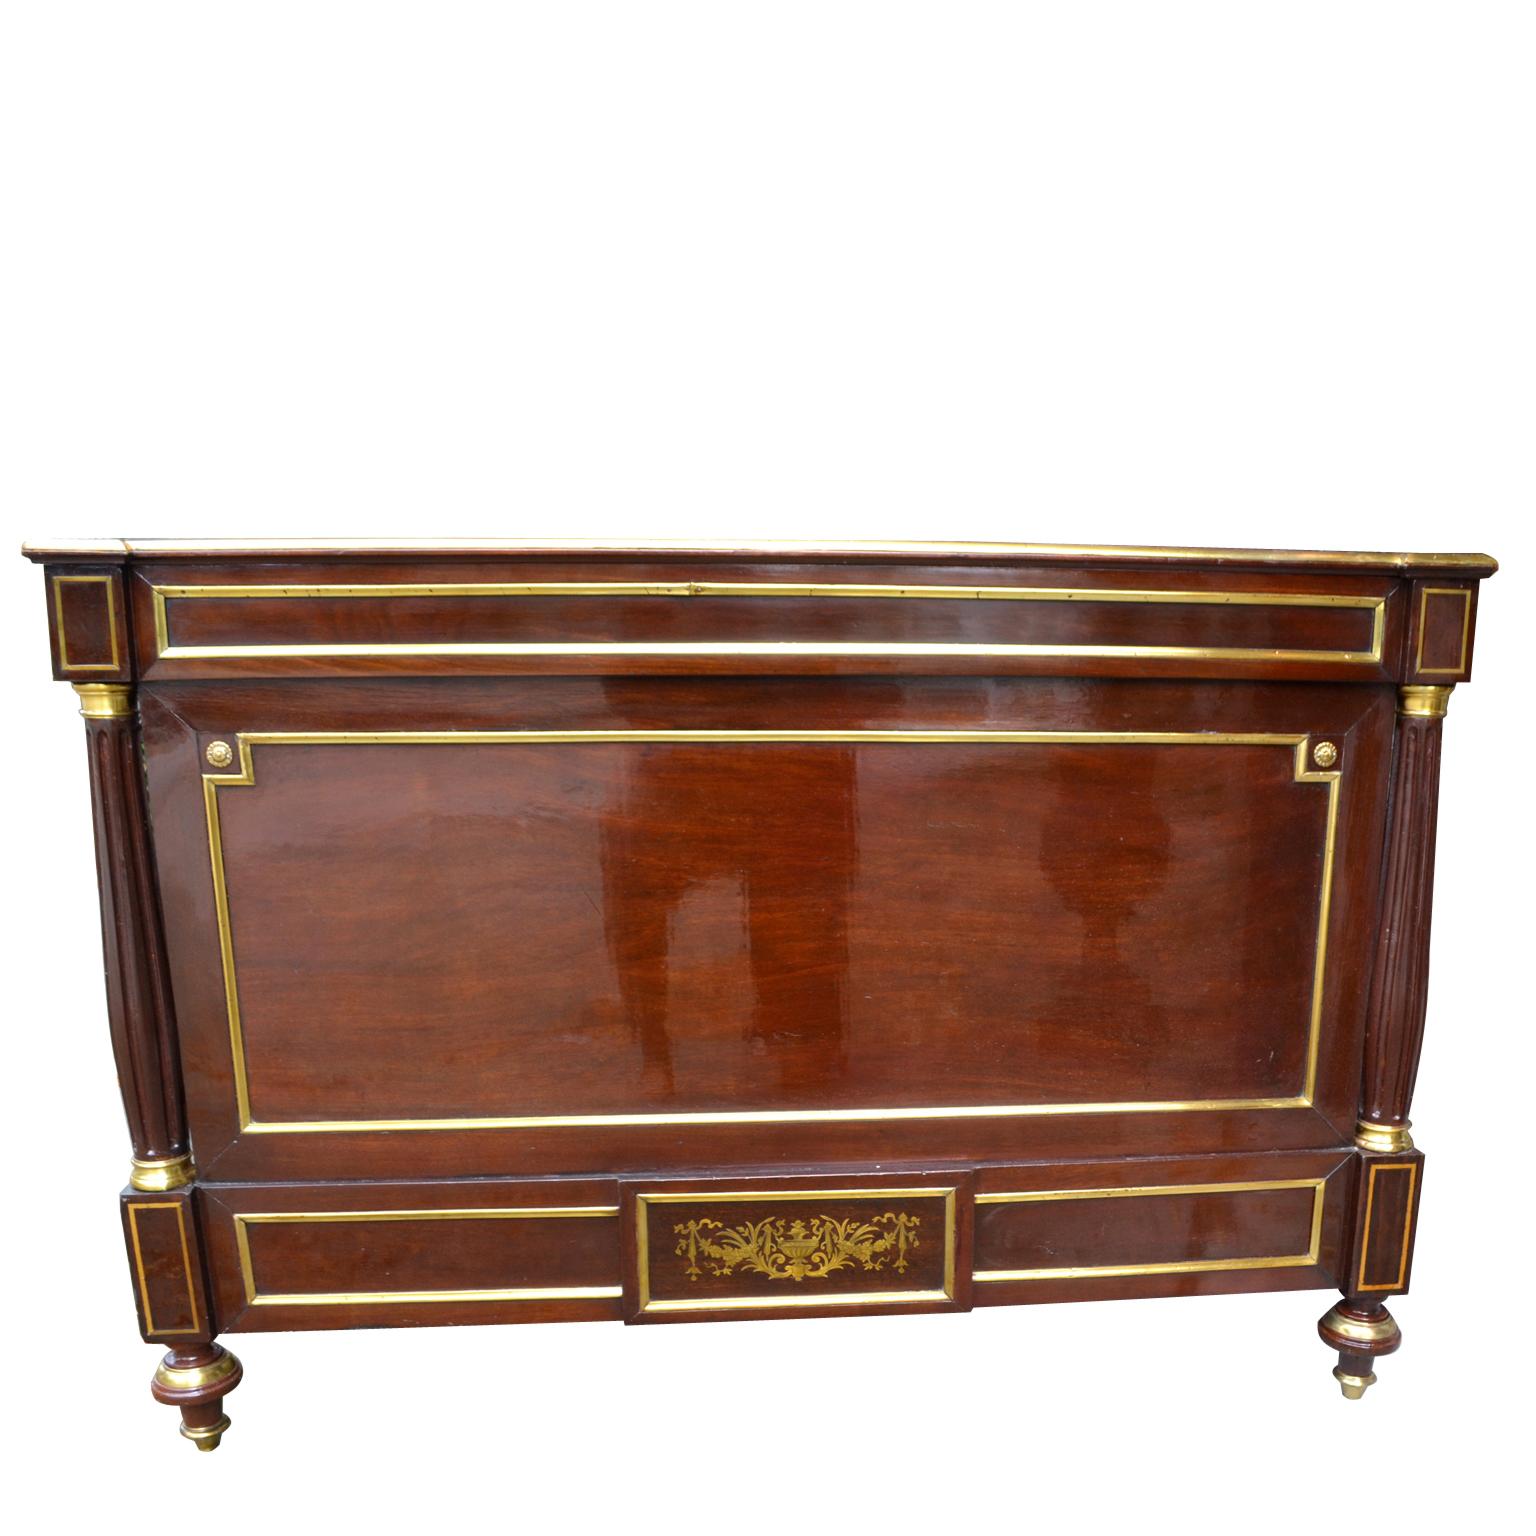 French Late 19th Century Louis XVI Style Mahogany and Inlaid Brass Bed